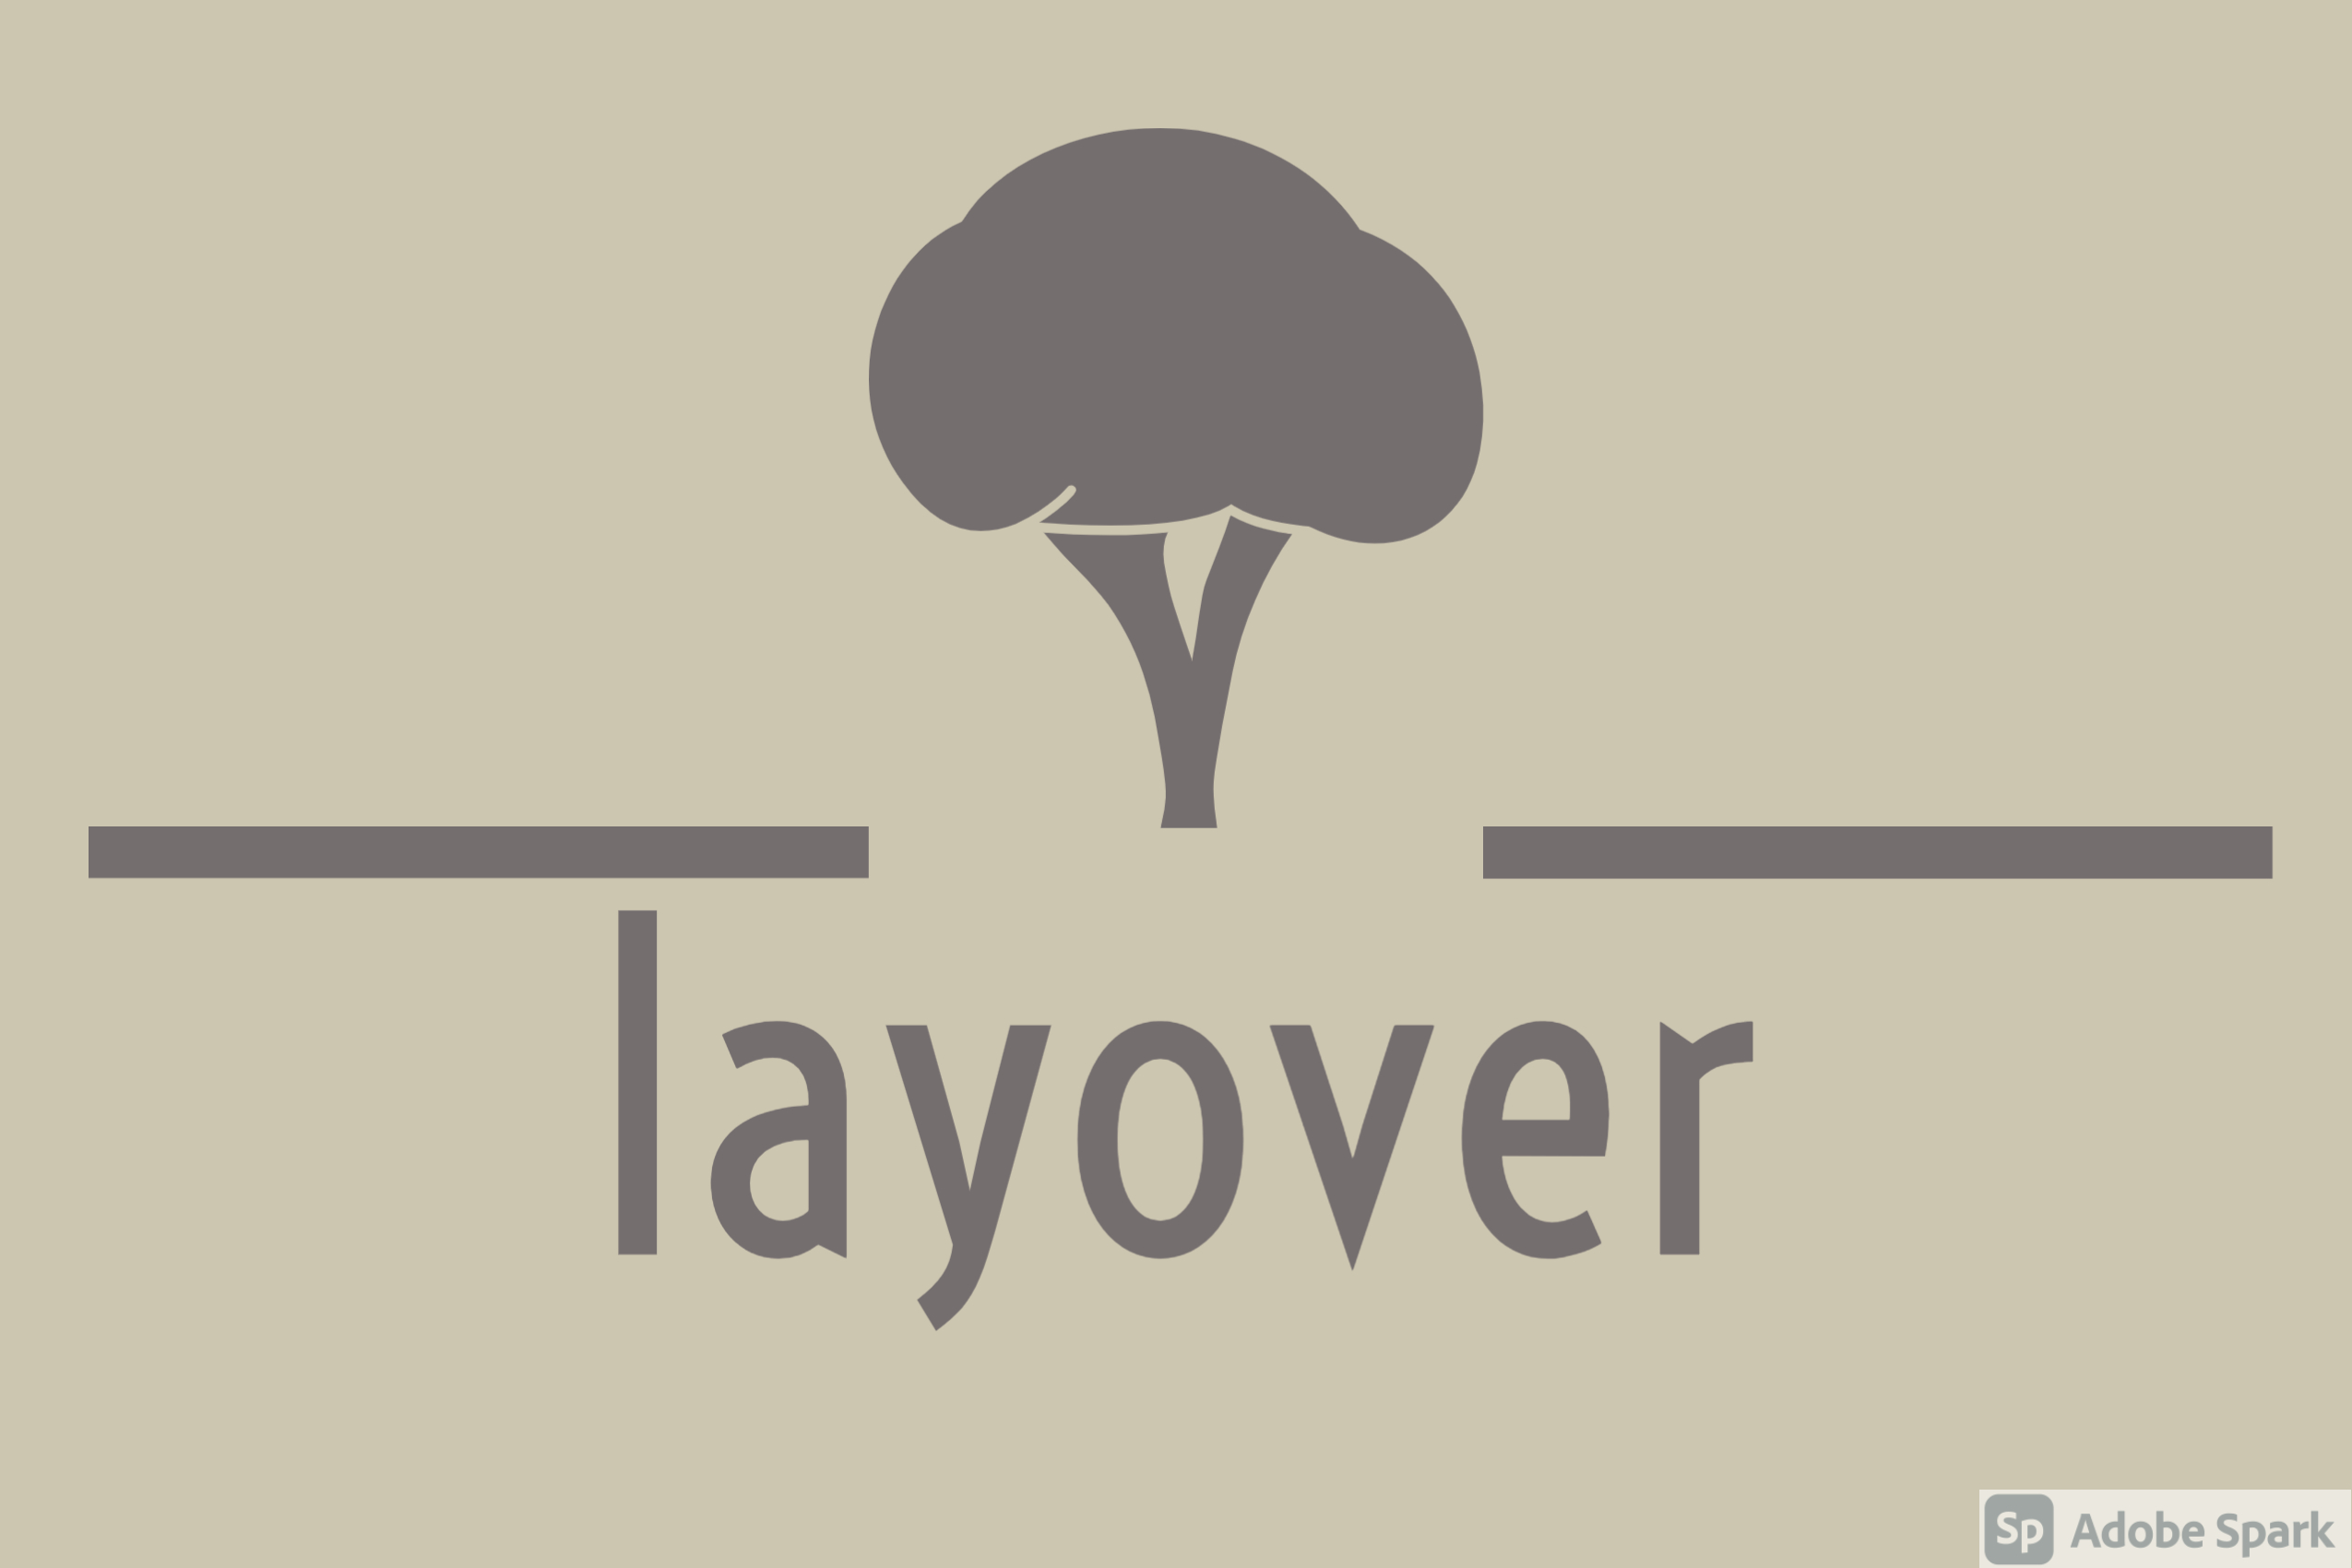 Layover - Your Free Time Spot